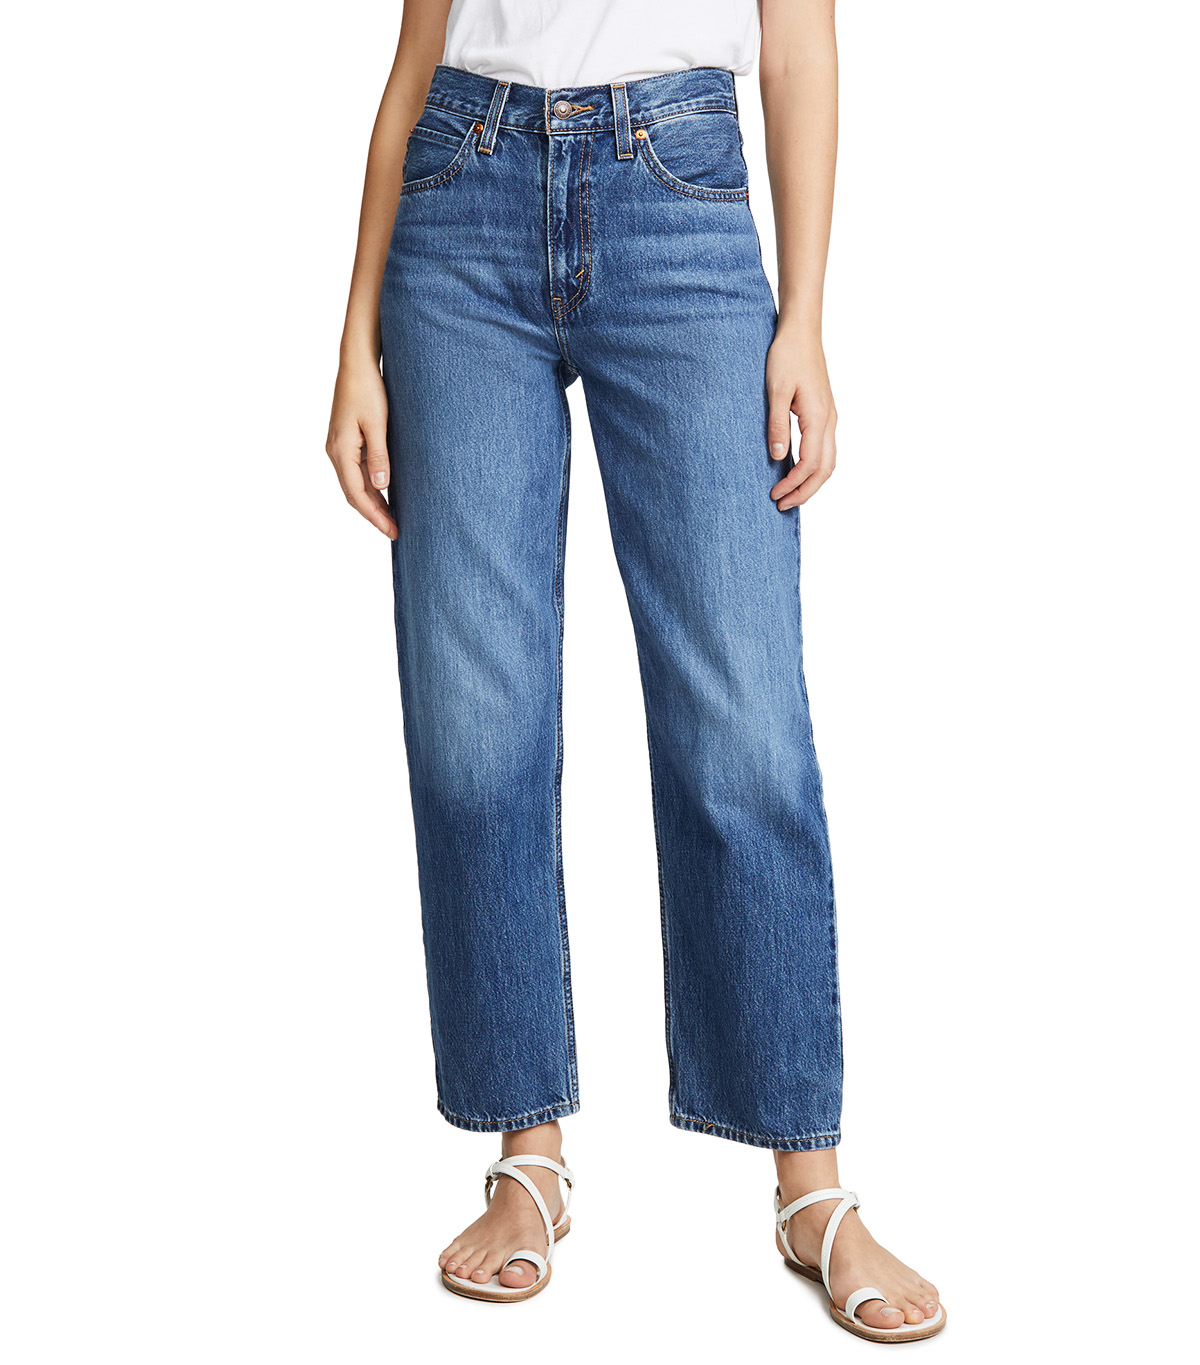 Levi's Dad Jeans Are the New It Jeans | Who What Wear UK